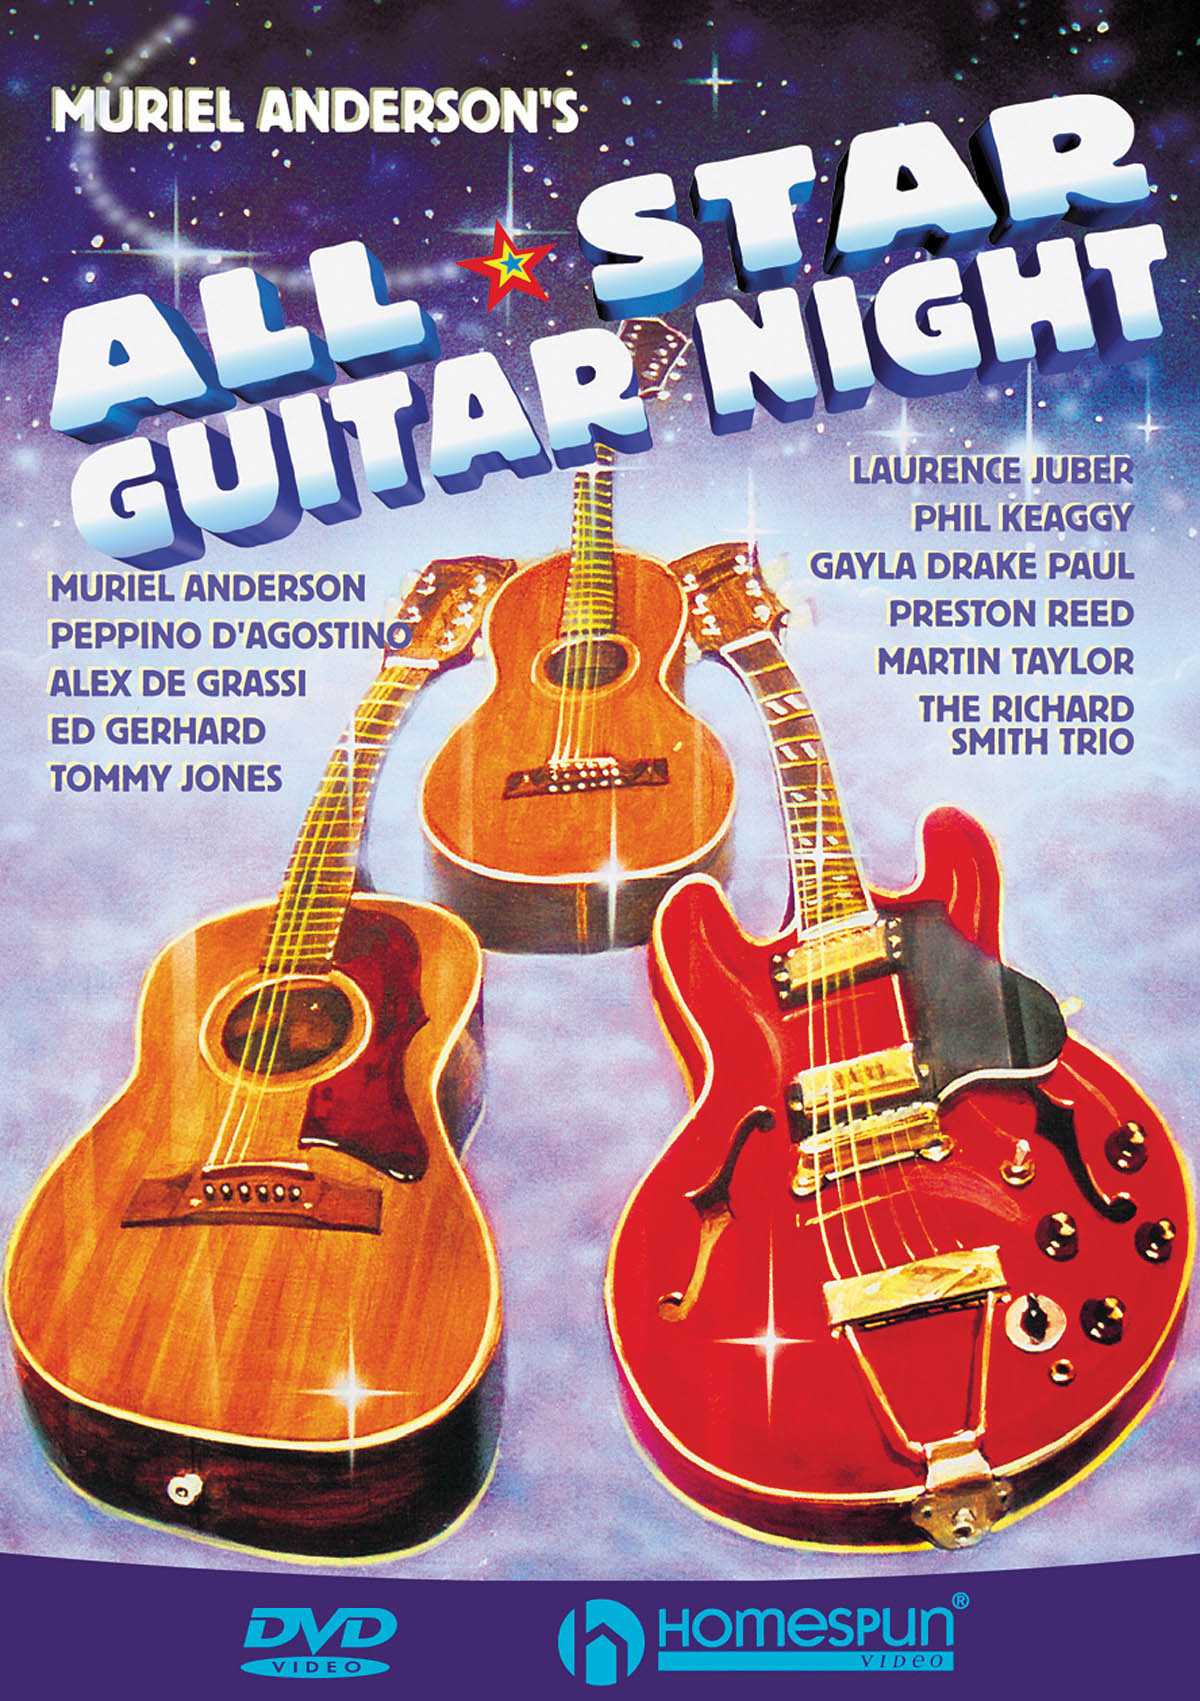 Image 1 of DVD - Muriel Anderson's All Star Guitar Night - SKU# 300-DVD240 : Product Type Media : Elderly Instruments